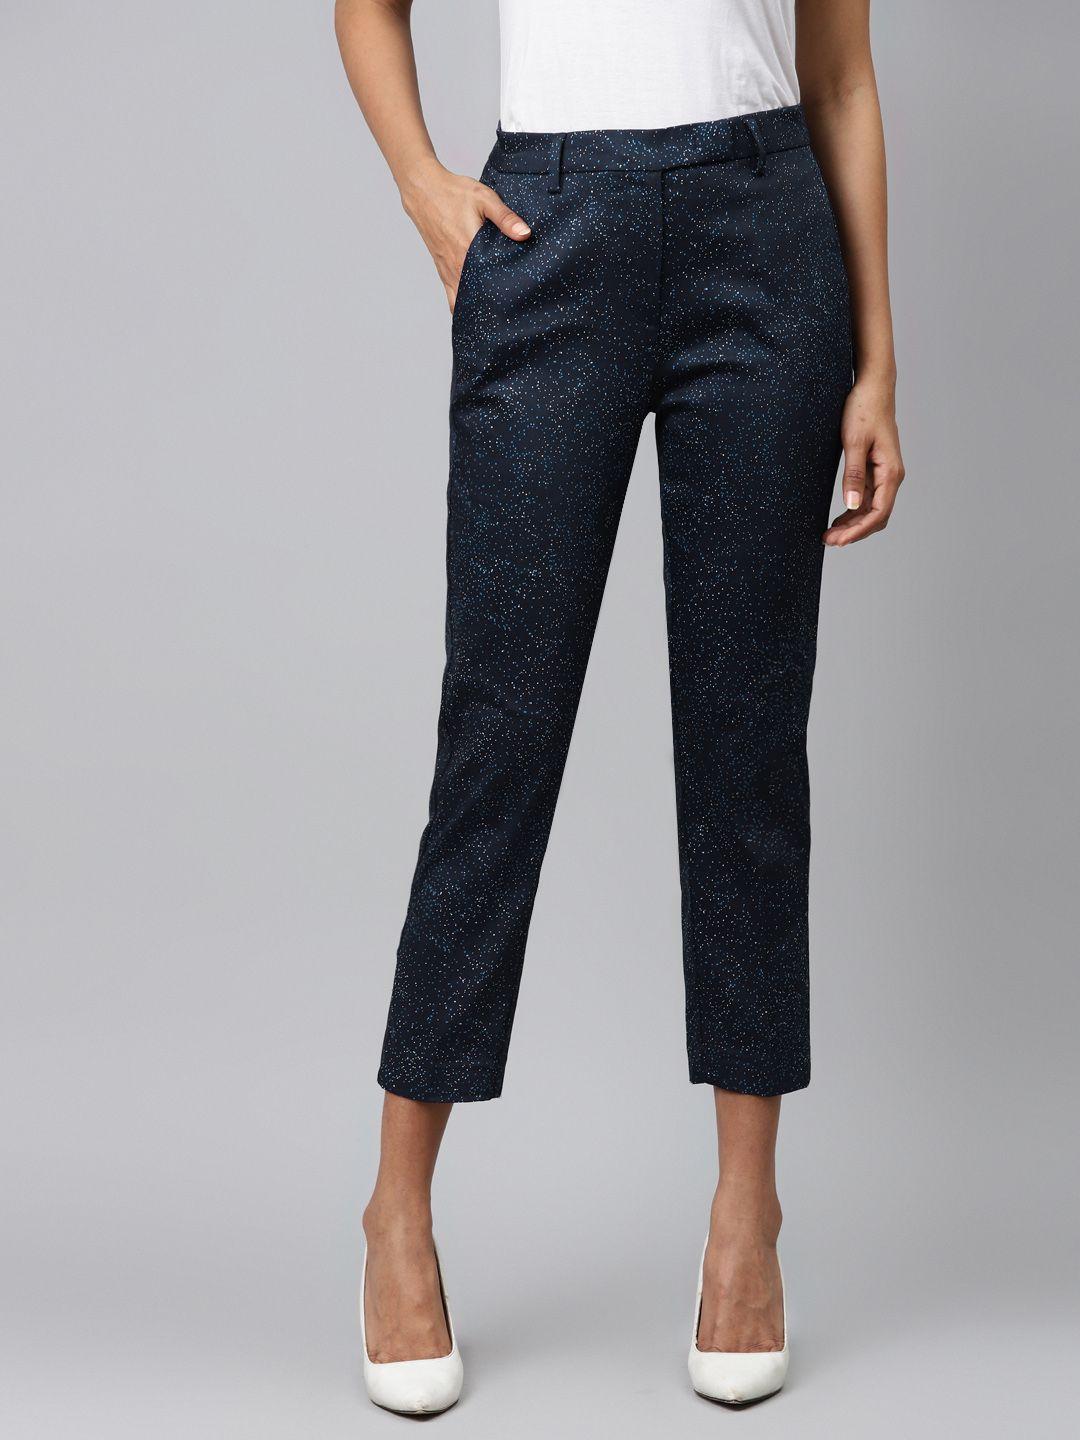 marks-&-spencer-women-navy-blue-&-white-slim-fit-micro-print-regular-cropped-trousers